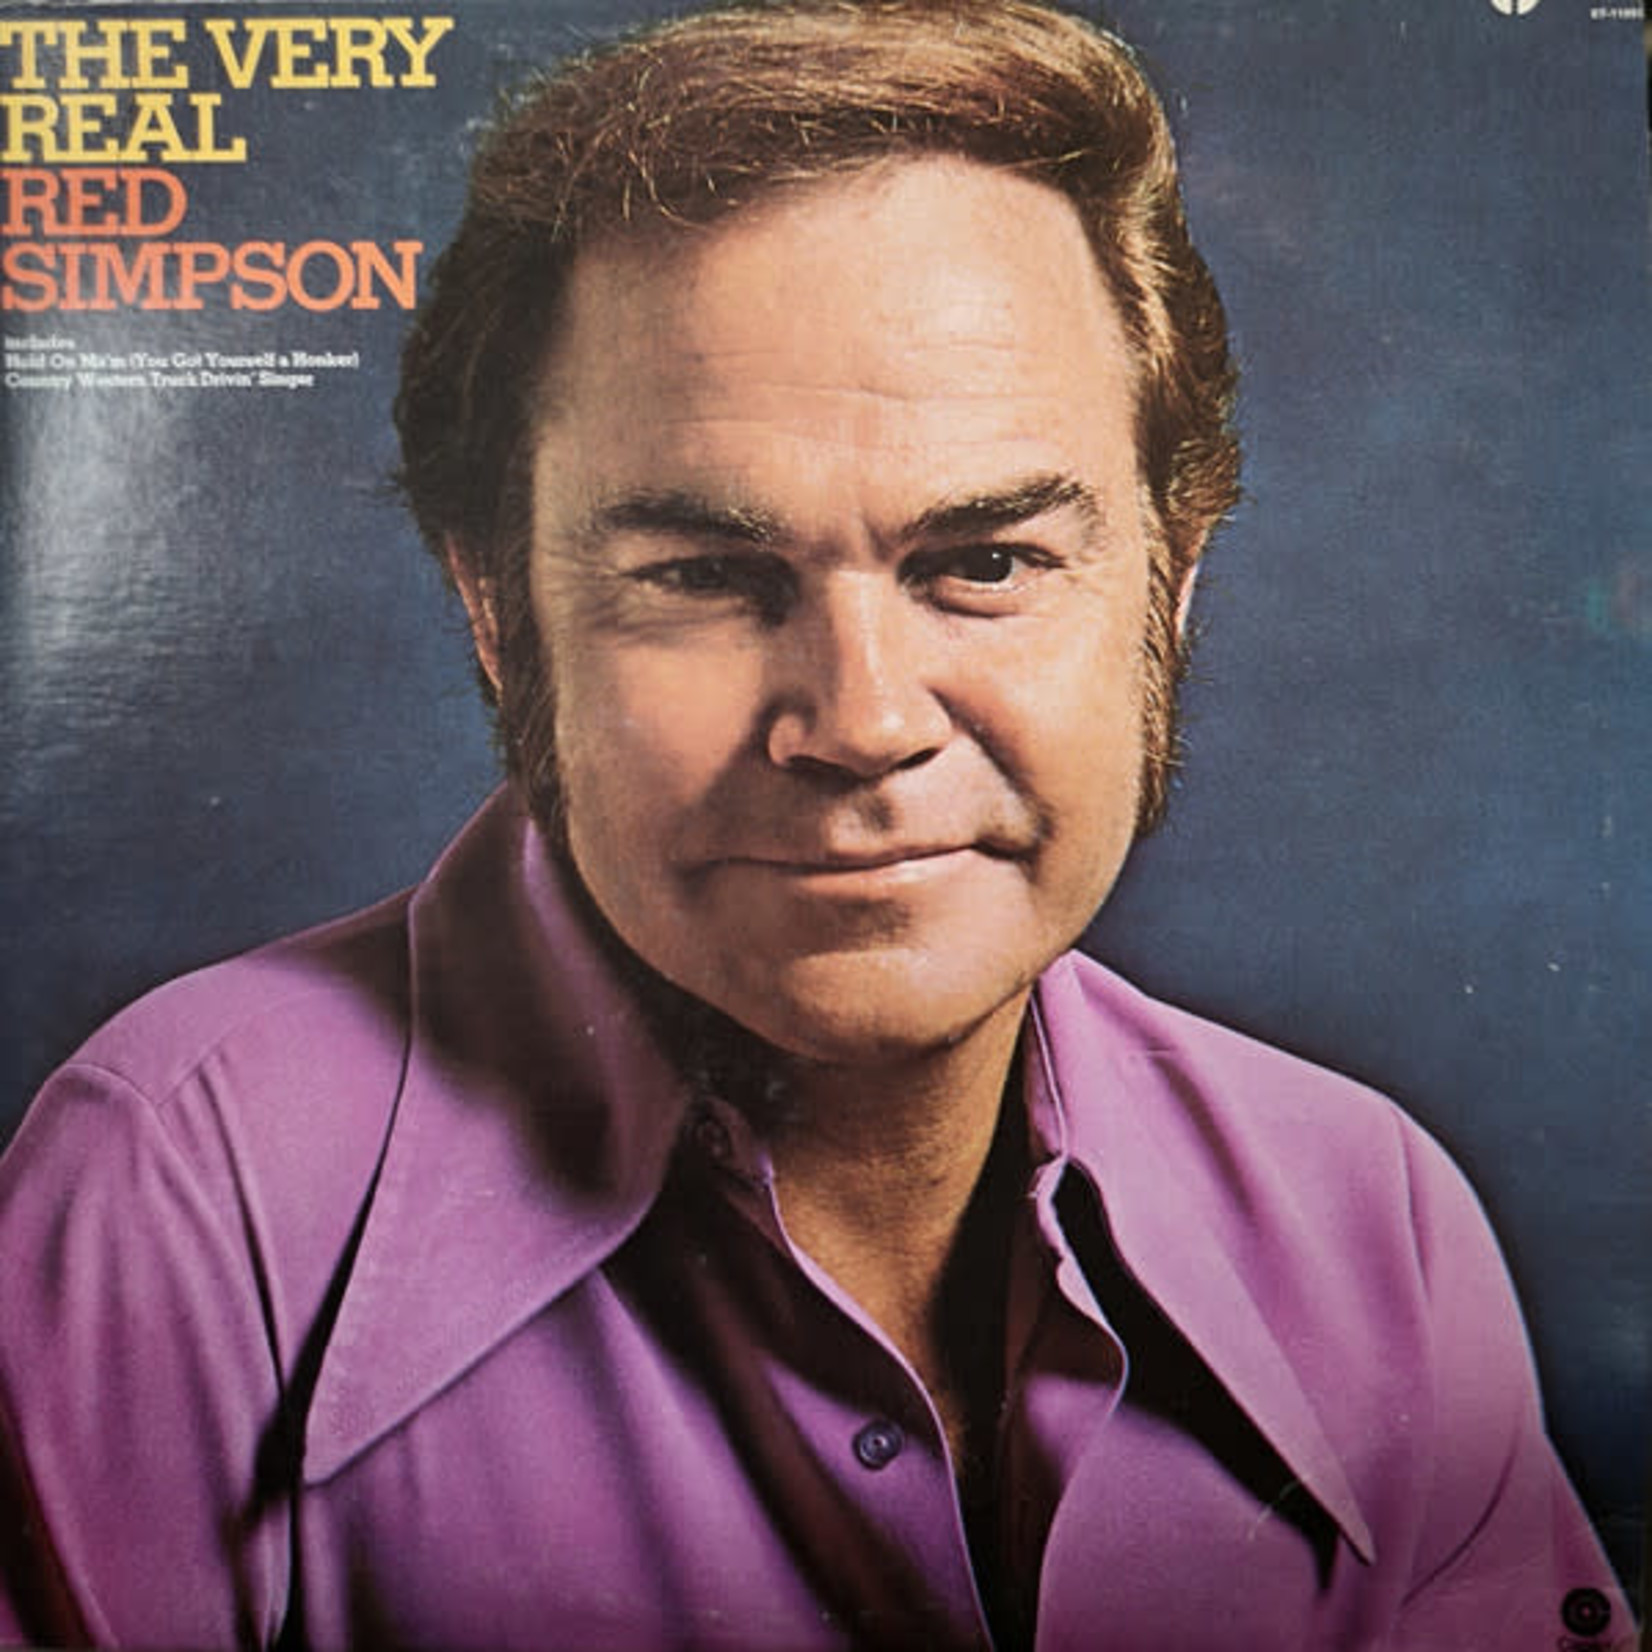 Red Simpson Red Simpson – The Very Real Red Simpson (VG, 1972, LP, Capitol Records – ST-11093, Canada) DSG